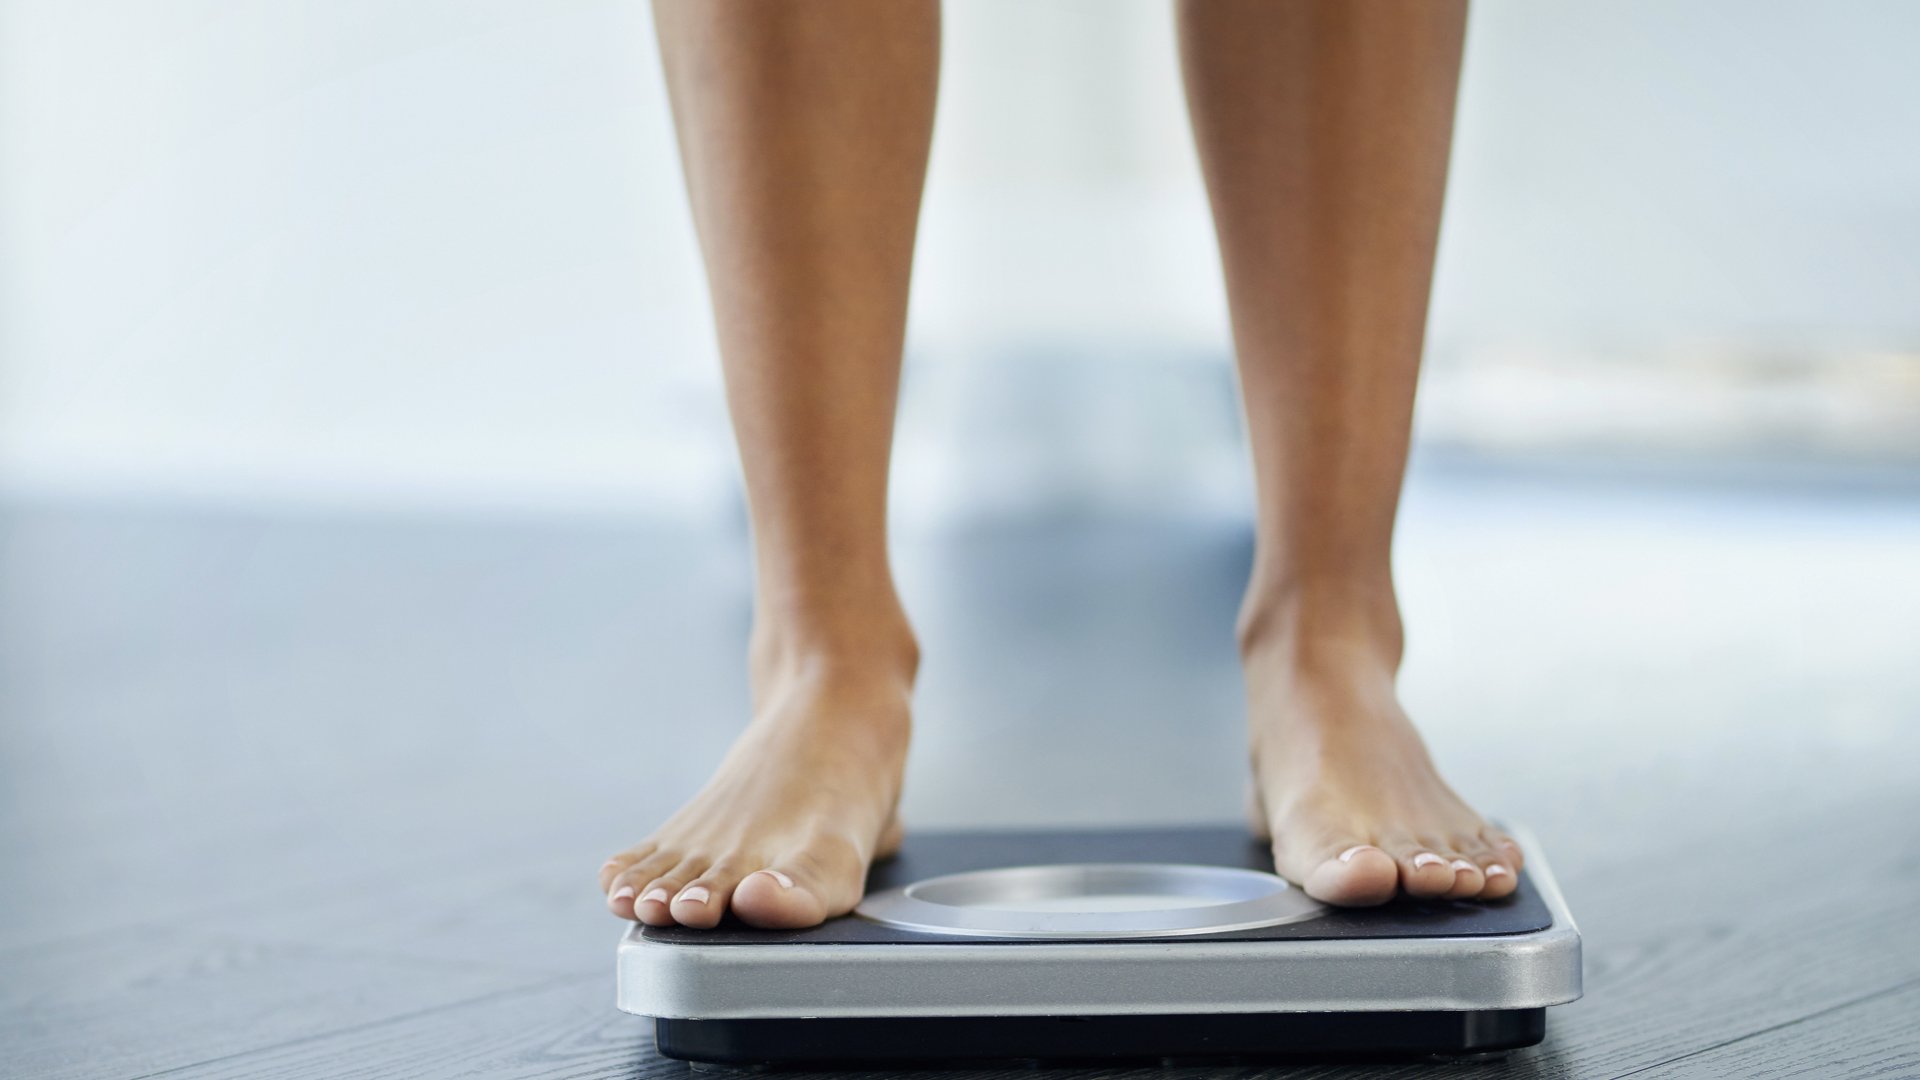 Body mass index research helps you set meaningful weight loss goals.